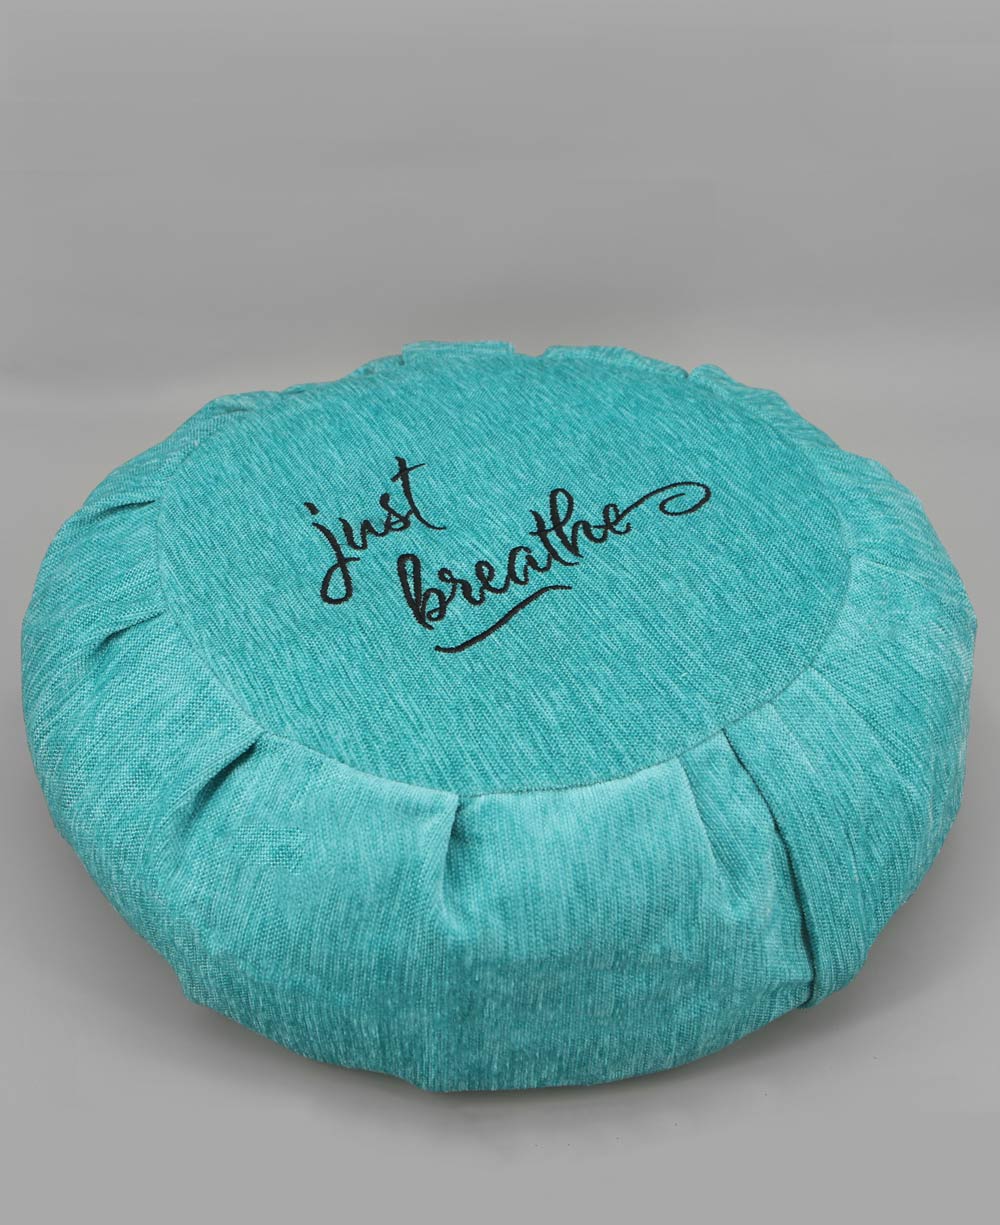 Meditation Cushion as comfortable as your favorite brand, crafted  sustainably and ethically with eco-friendly materials. – Rose Buddha